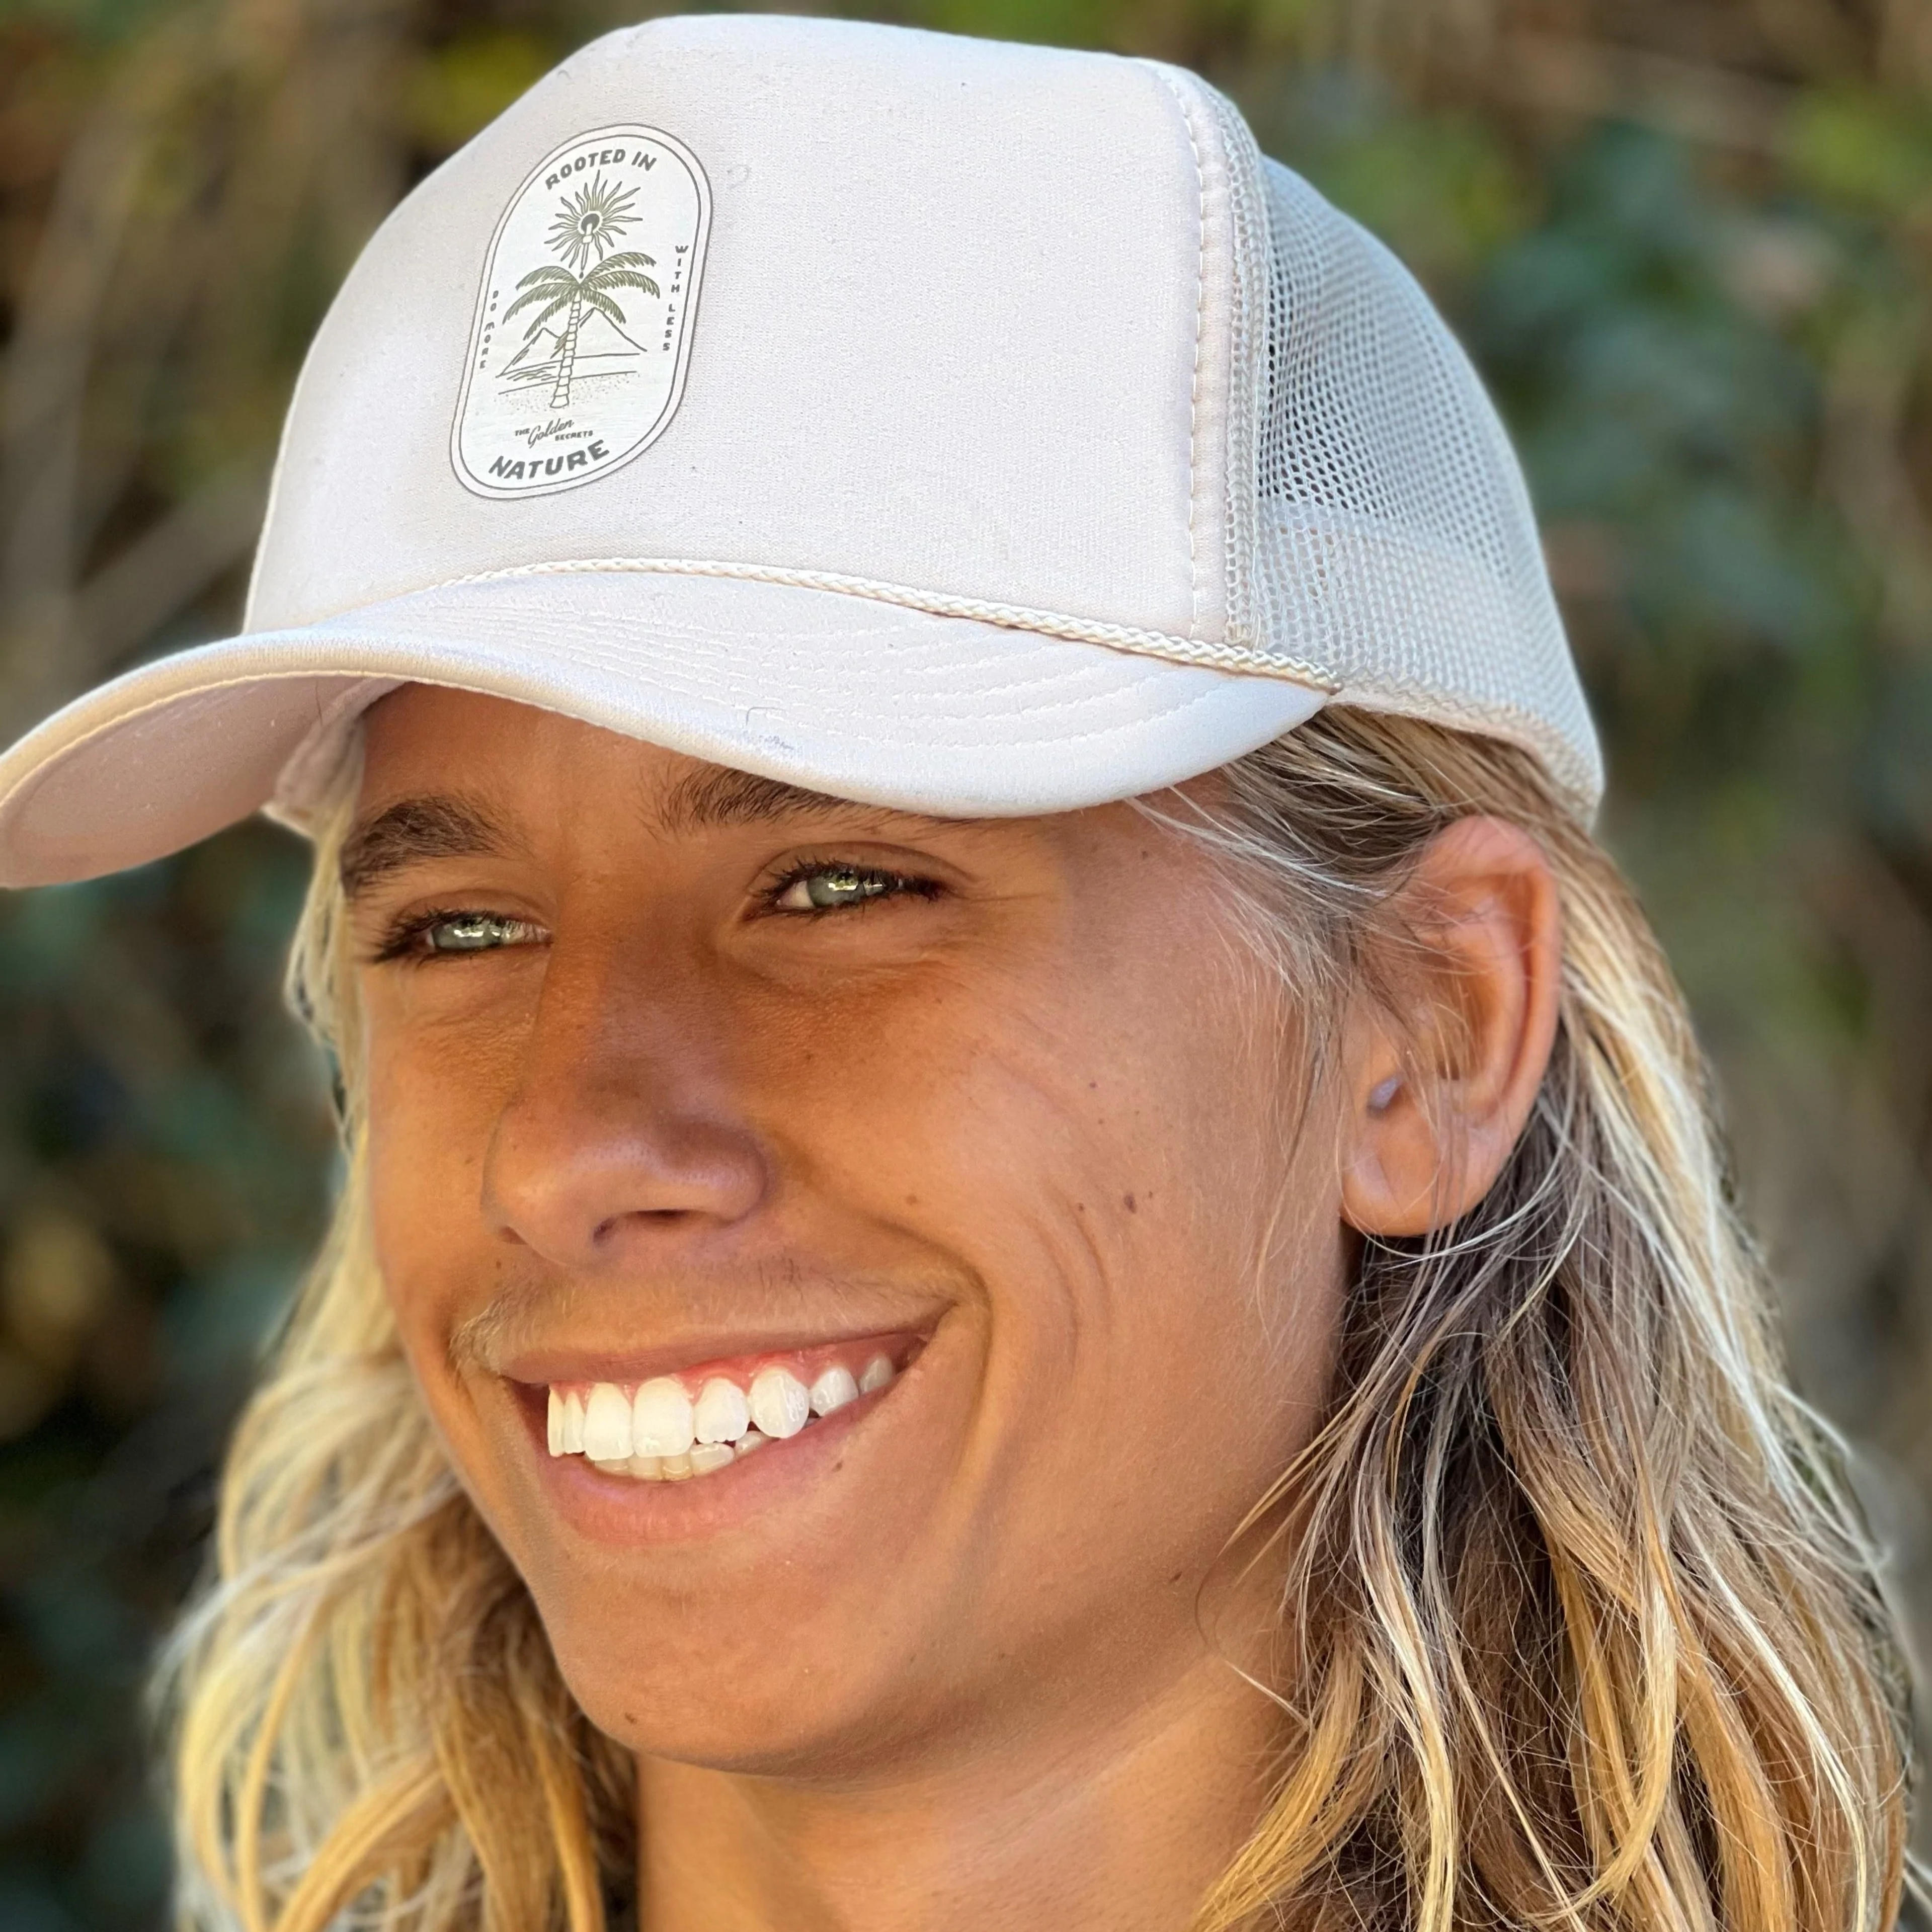 Rooted in Nature Trucker Hat